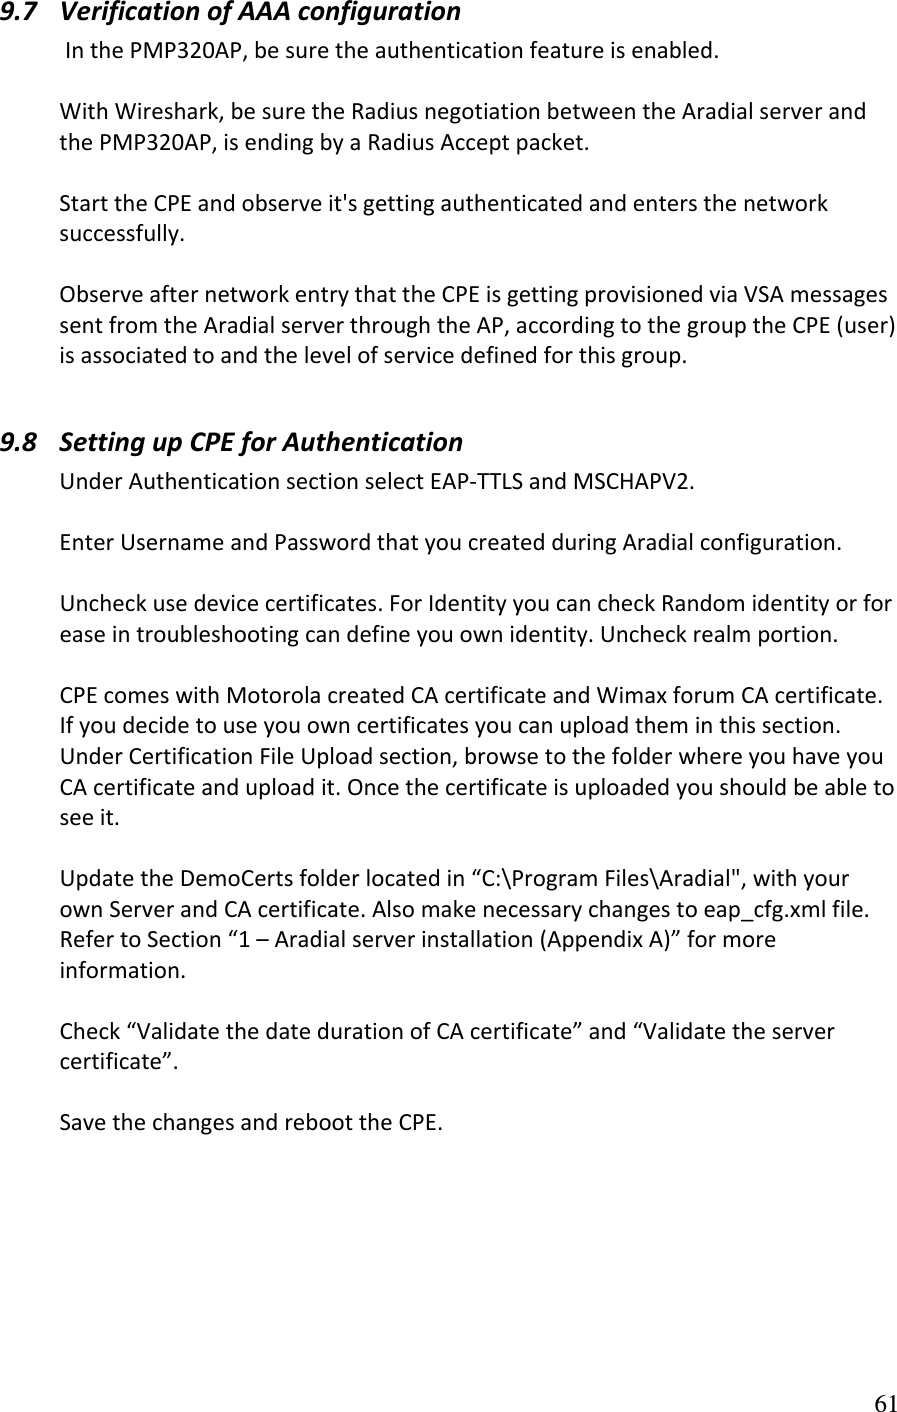 9.7 VerificationofAAAconfigurationInthePMP320AP,besuretheauthenticationfeatureisenabled.WithWireshark,besuretheRadiusnegotiationbetweentheAradialserverandthePMP320AP,isendingbyaRadiusAcceptpacket.StarttheCPEandobserveit&apos;sgettingauthenticatedandentersthenetworksuccessfully.ObserveafternetworkentrythattheCPEisgettingprovisionedviaVSAmessagessentfromtheAradialserverthroughtheAP,accordingtothegrouptheCPE(user)isassociatedtoandthelevelofservicedefinedforthisgroup. 9.8 SettingupCPEforAuthenticationUnderAuthenticationsectionselectEAP‐TTLSandMSCHAPV2.EnterUsernameandPasswordthatyoucreatedduringAradialconfiguration.Uncheckusedevicecertificates.ForIdentityyoucancheckRandomidentityorforeaseintroubleshootingcandefineyouownidentity.Uncheckrealmportion.CPEcomeswithMotorolacreatedCAcertificateandWimaxforumCAcertificate.Ifyoudecidetouseyouowncertificatesyoucanuploadtheminthissection.UnderCertificationFileUploadsection,browsetothefolderwhereyouhaveyouCAcertificateanduploadit.Oncethecertificateisuploadedyoushouldbeabletoseeit.UpdatetheDemoCertsfolderlocatedin“C:\ProgramFiles\Aradial&quot;,withyourownServerandCAcertificate.Alsomakenecessarychangestoeap_cfg.xmlfile.RefertoSection“1–Aradialserverinstallation(AppendixA)”formoreinformation.Check“ValidatethedatedurationofCAcertificate”and“Validatetheservercertificate”.SavethechangesandreboottheCPE.  61